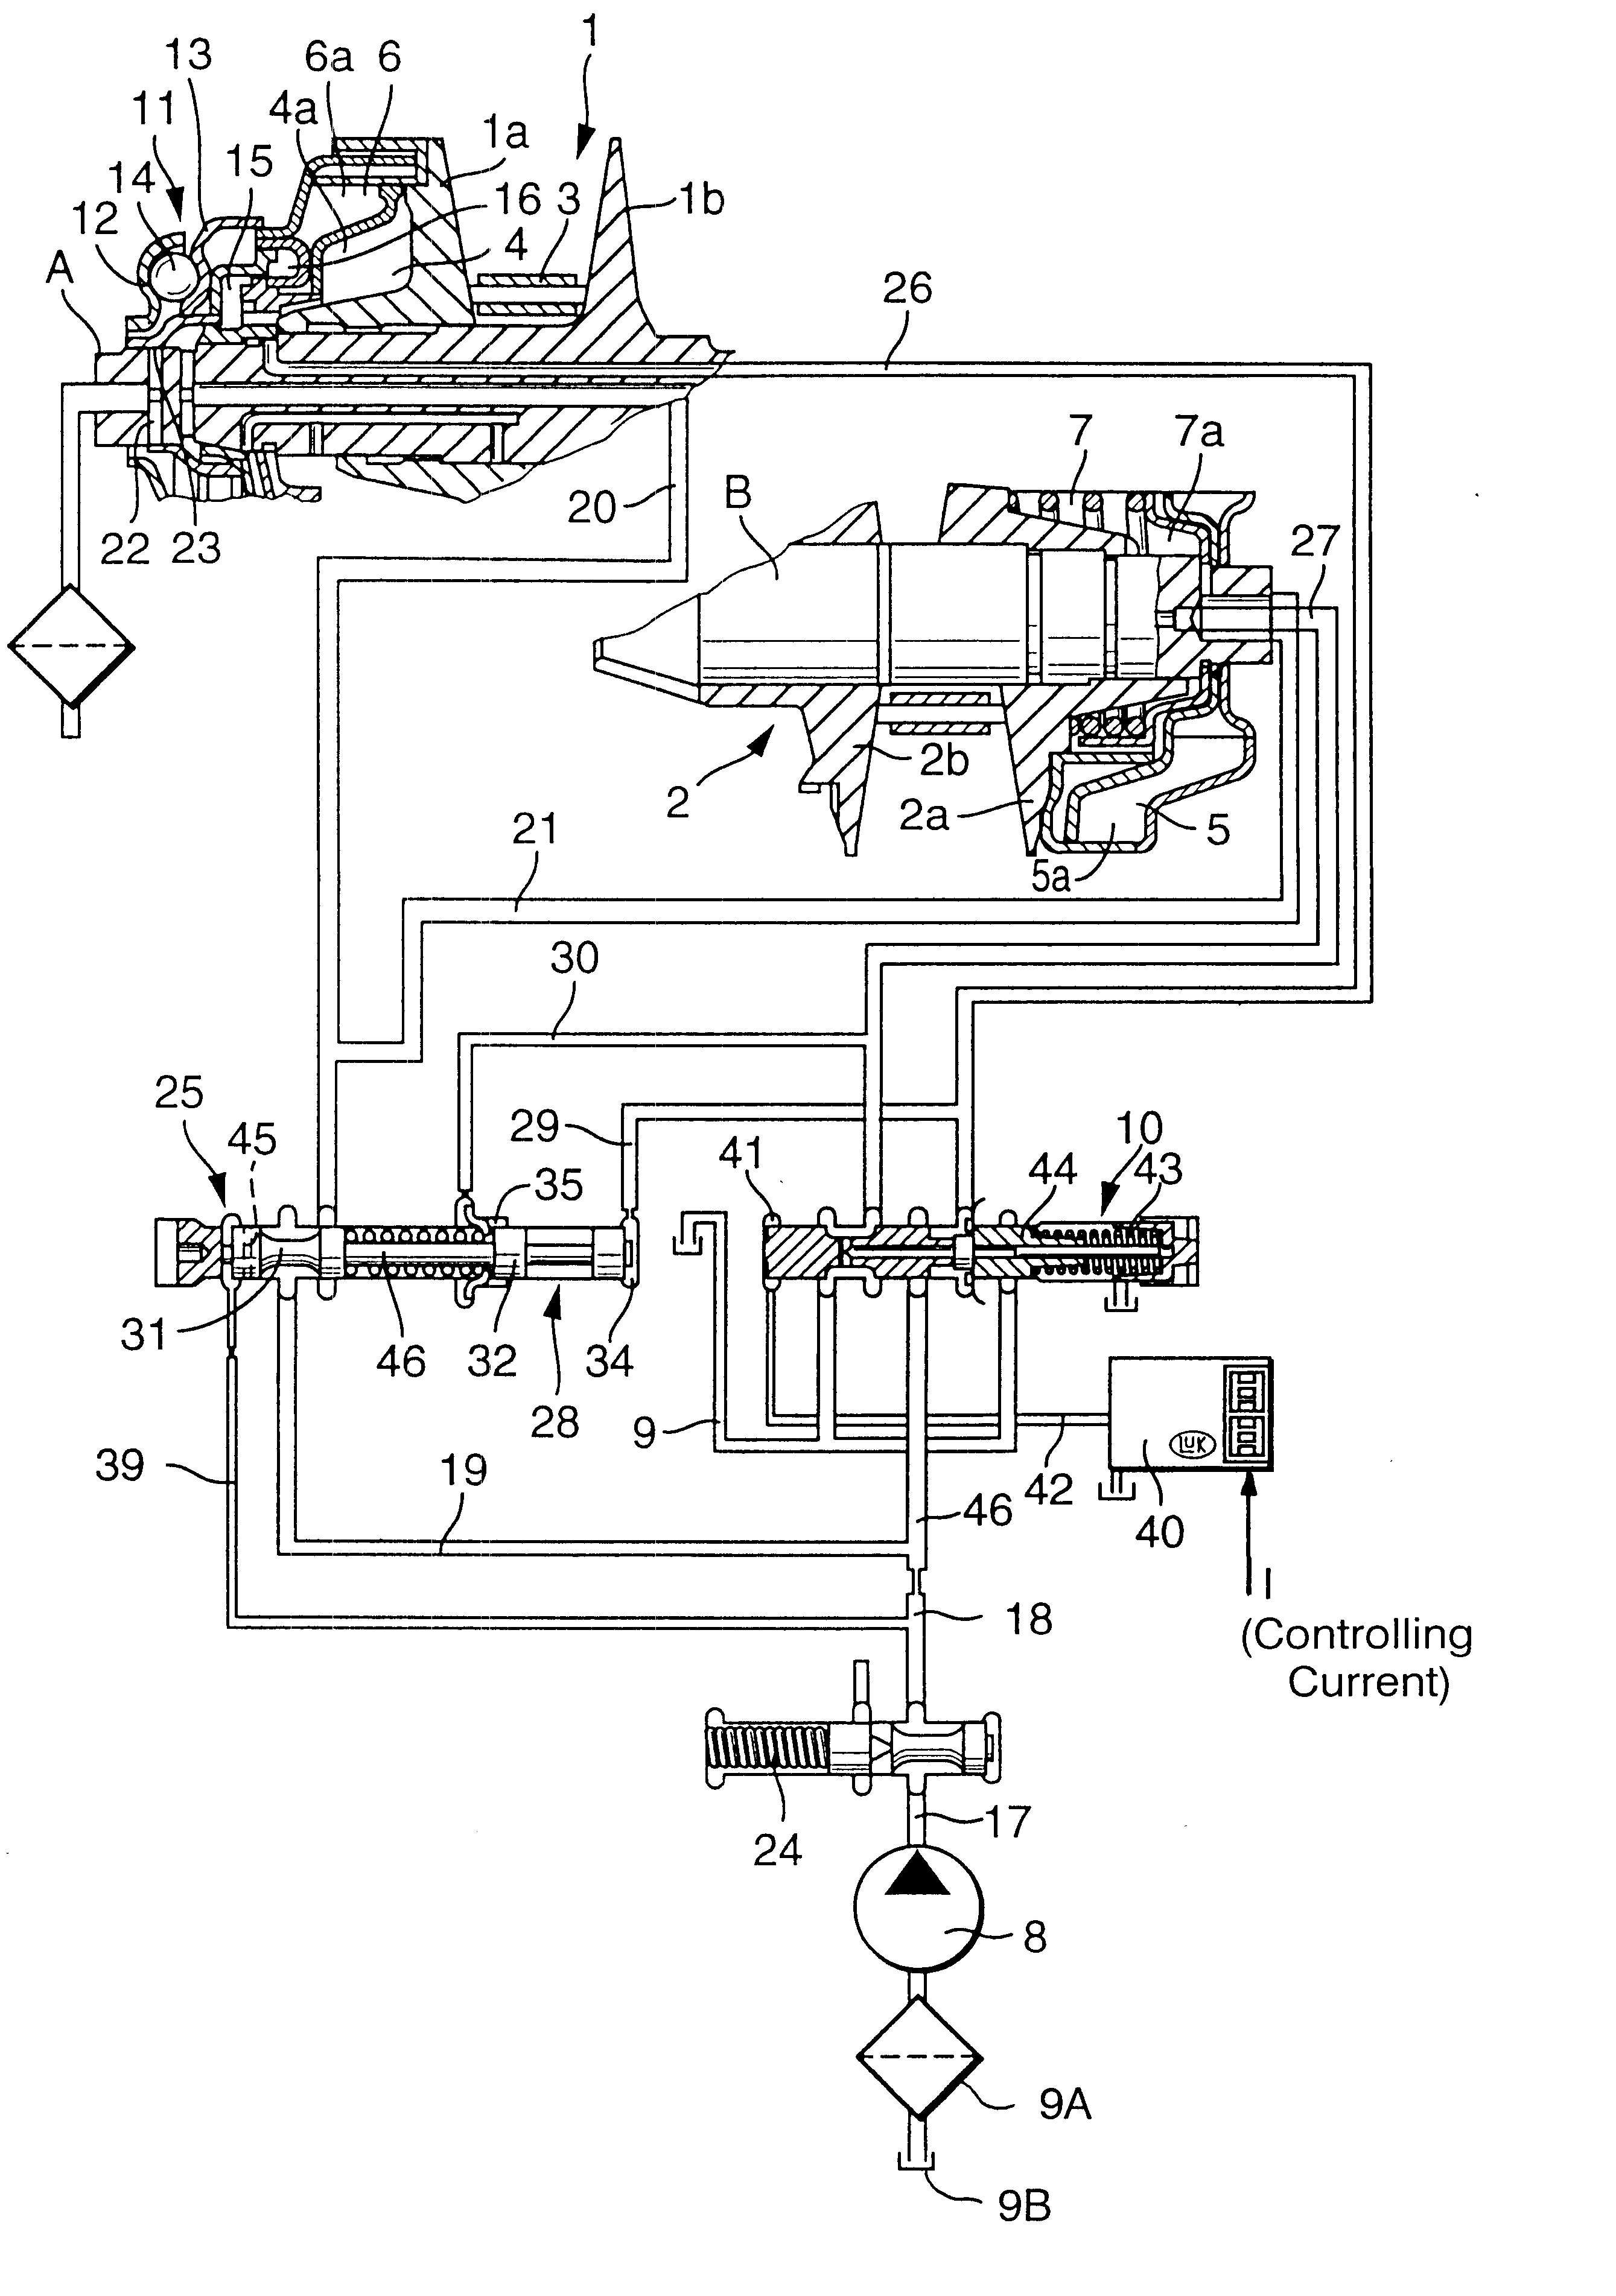 Method and apparatus for controlling a transmission